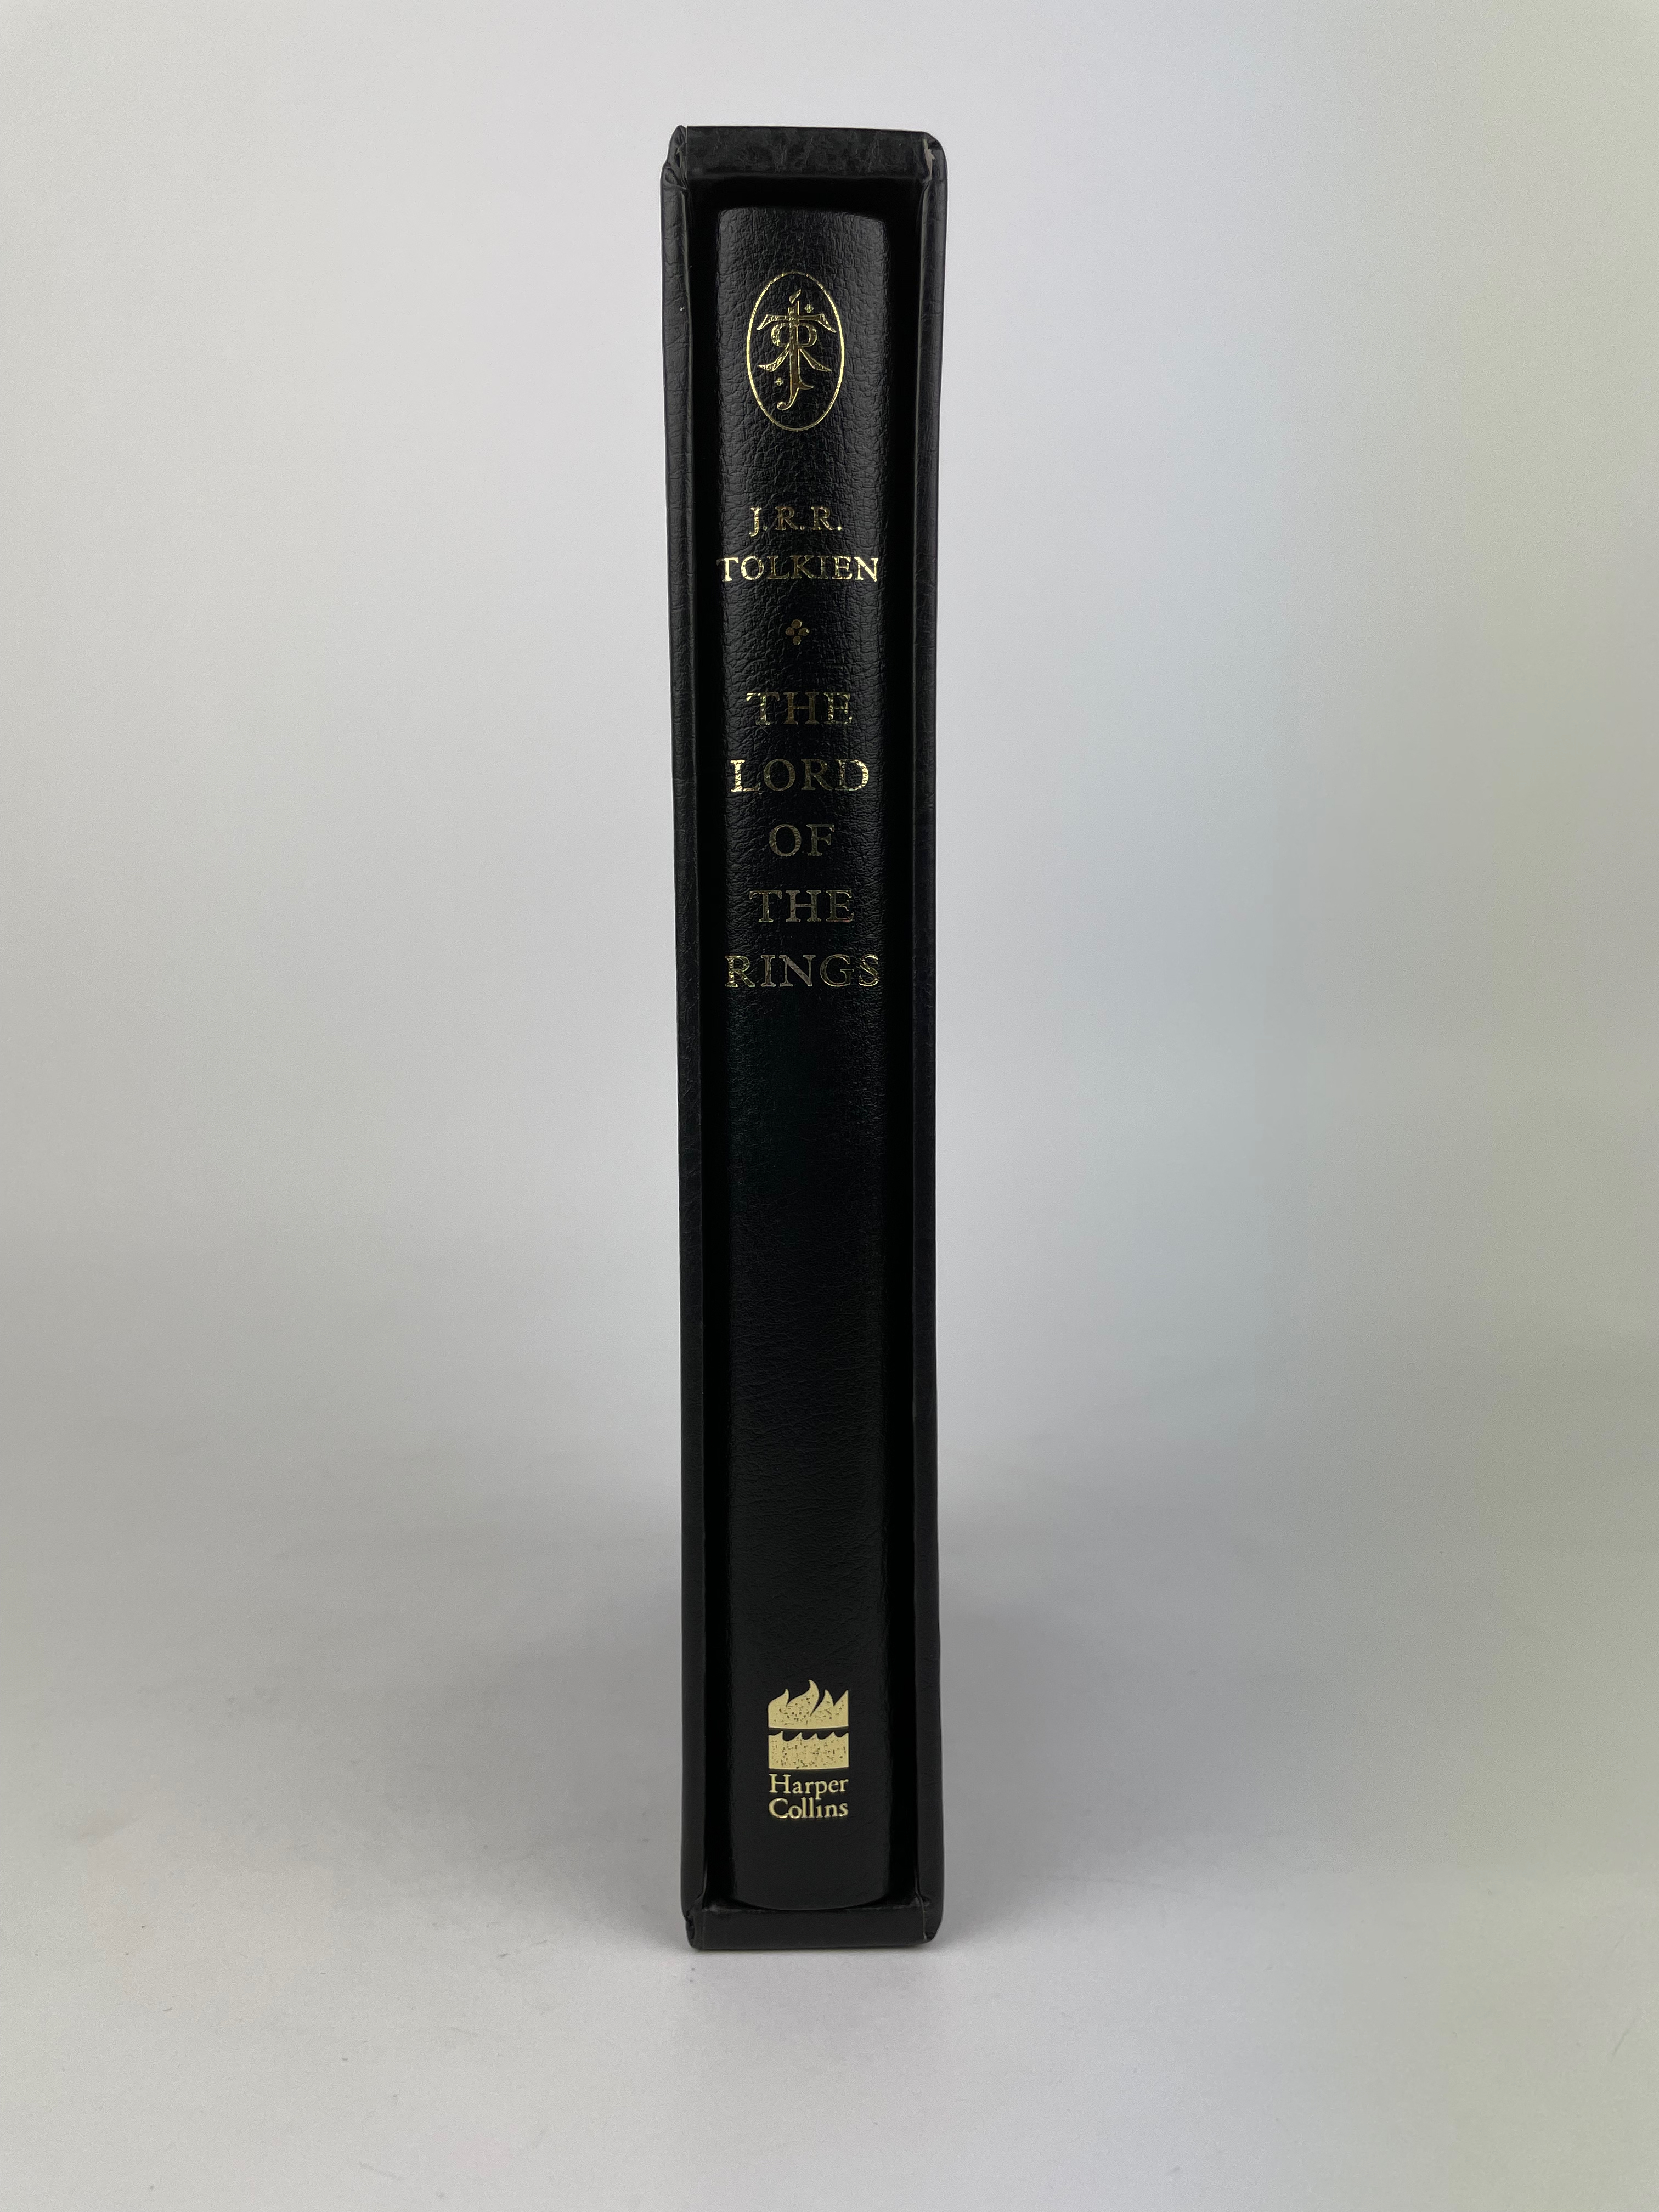 Lord of the Rings, Harper Collins Deluxe Limited Edition of 2002 - Black Leather 2